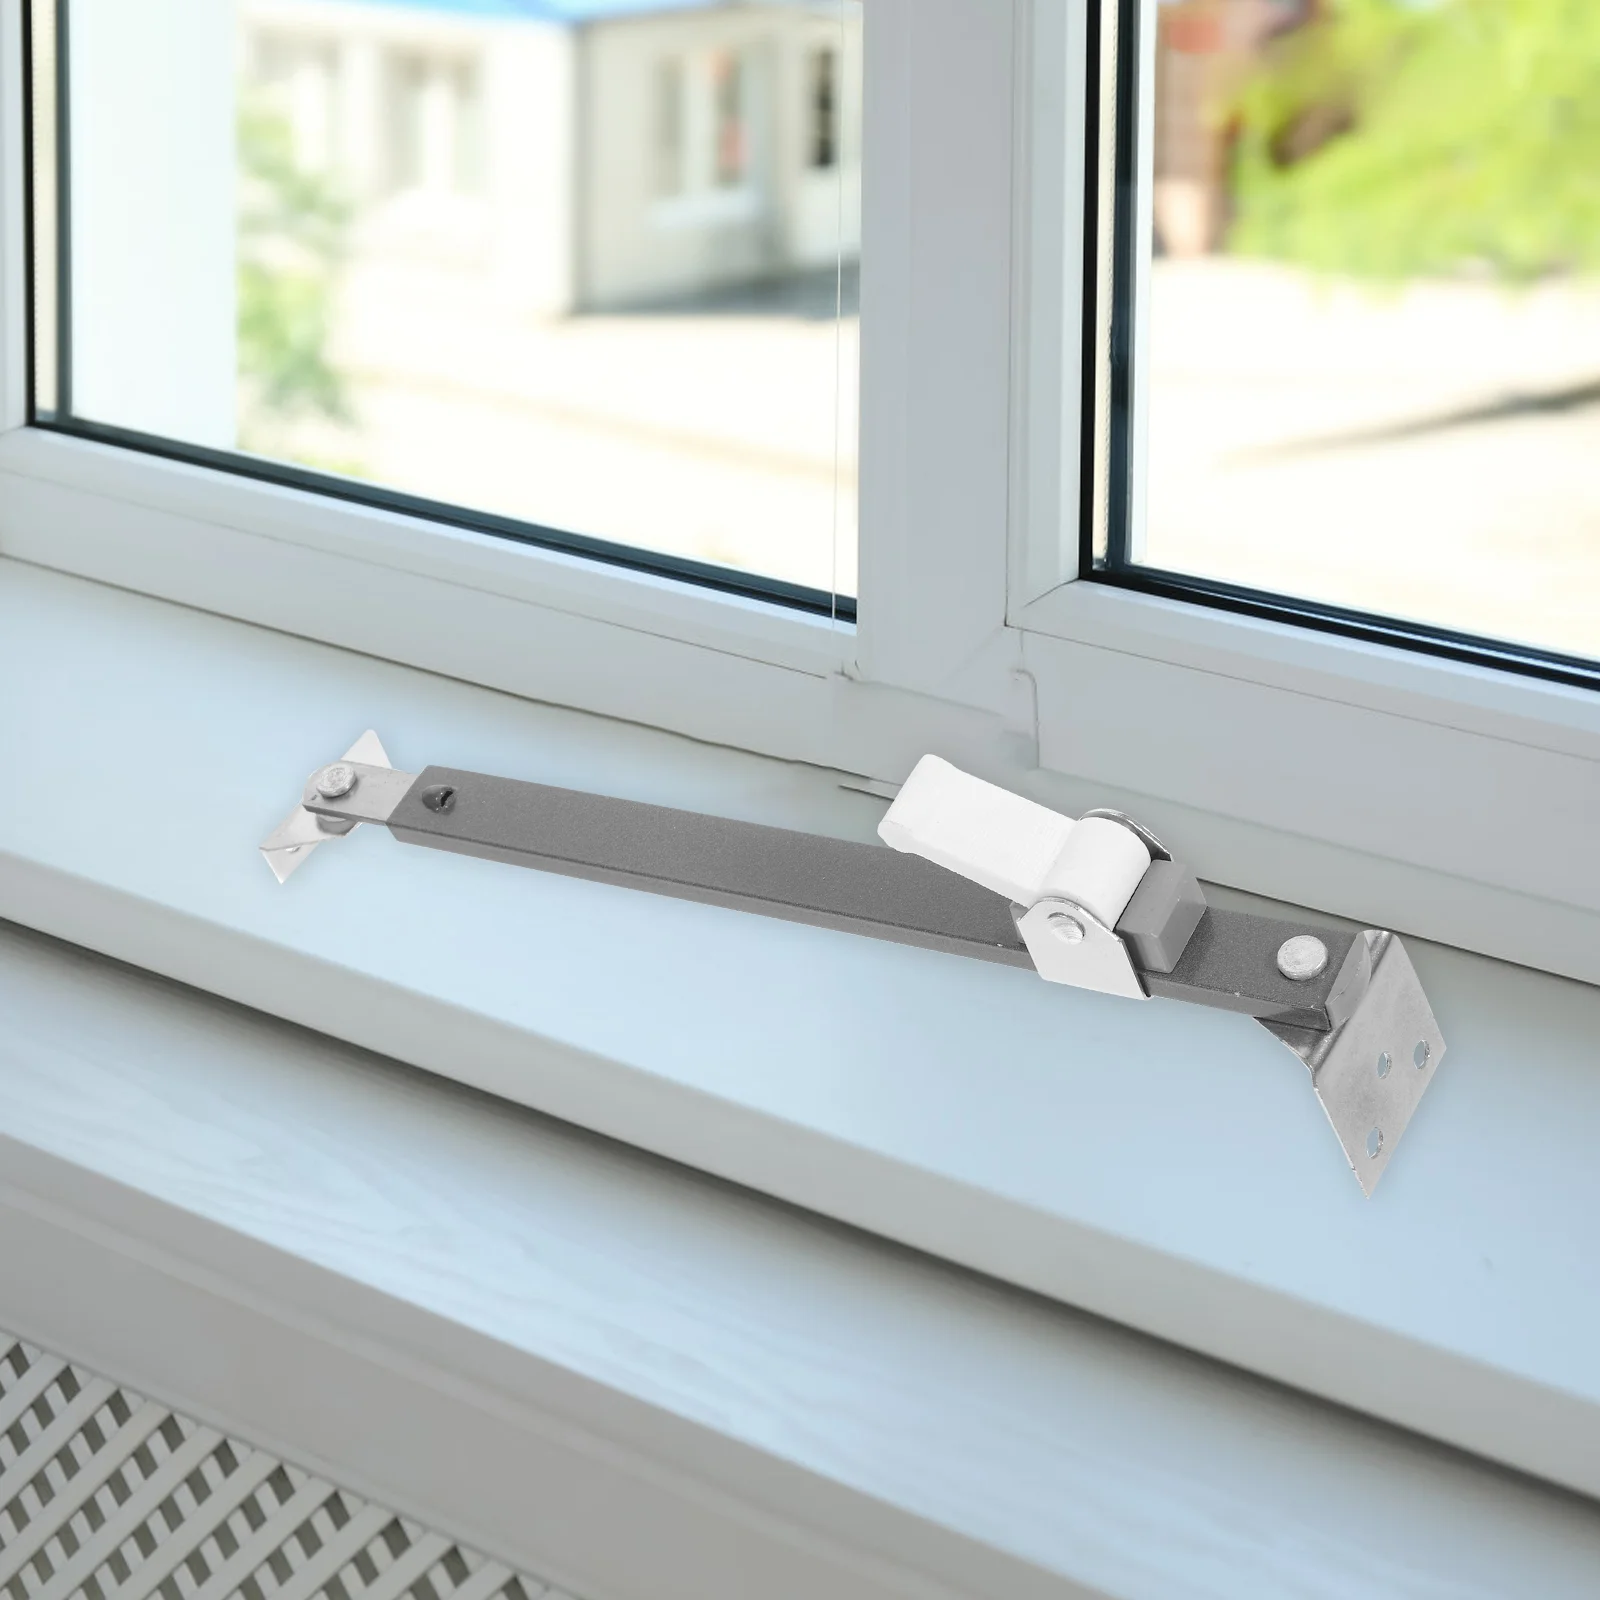 Window Security Bar Door Safety Locks Accessories Home Anti-theft Aluminum Alloy Sliding Household